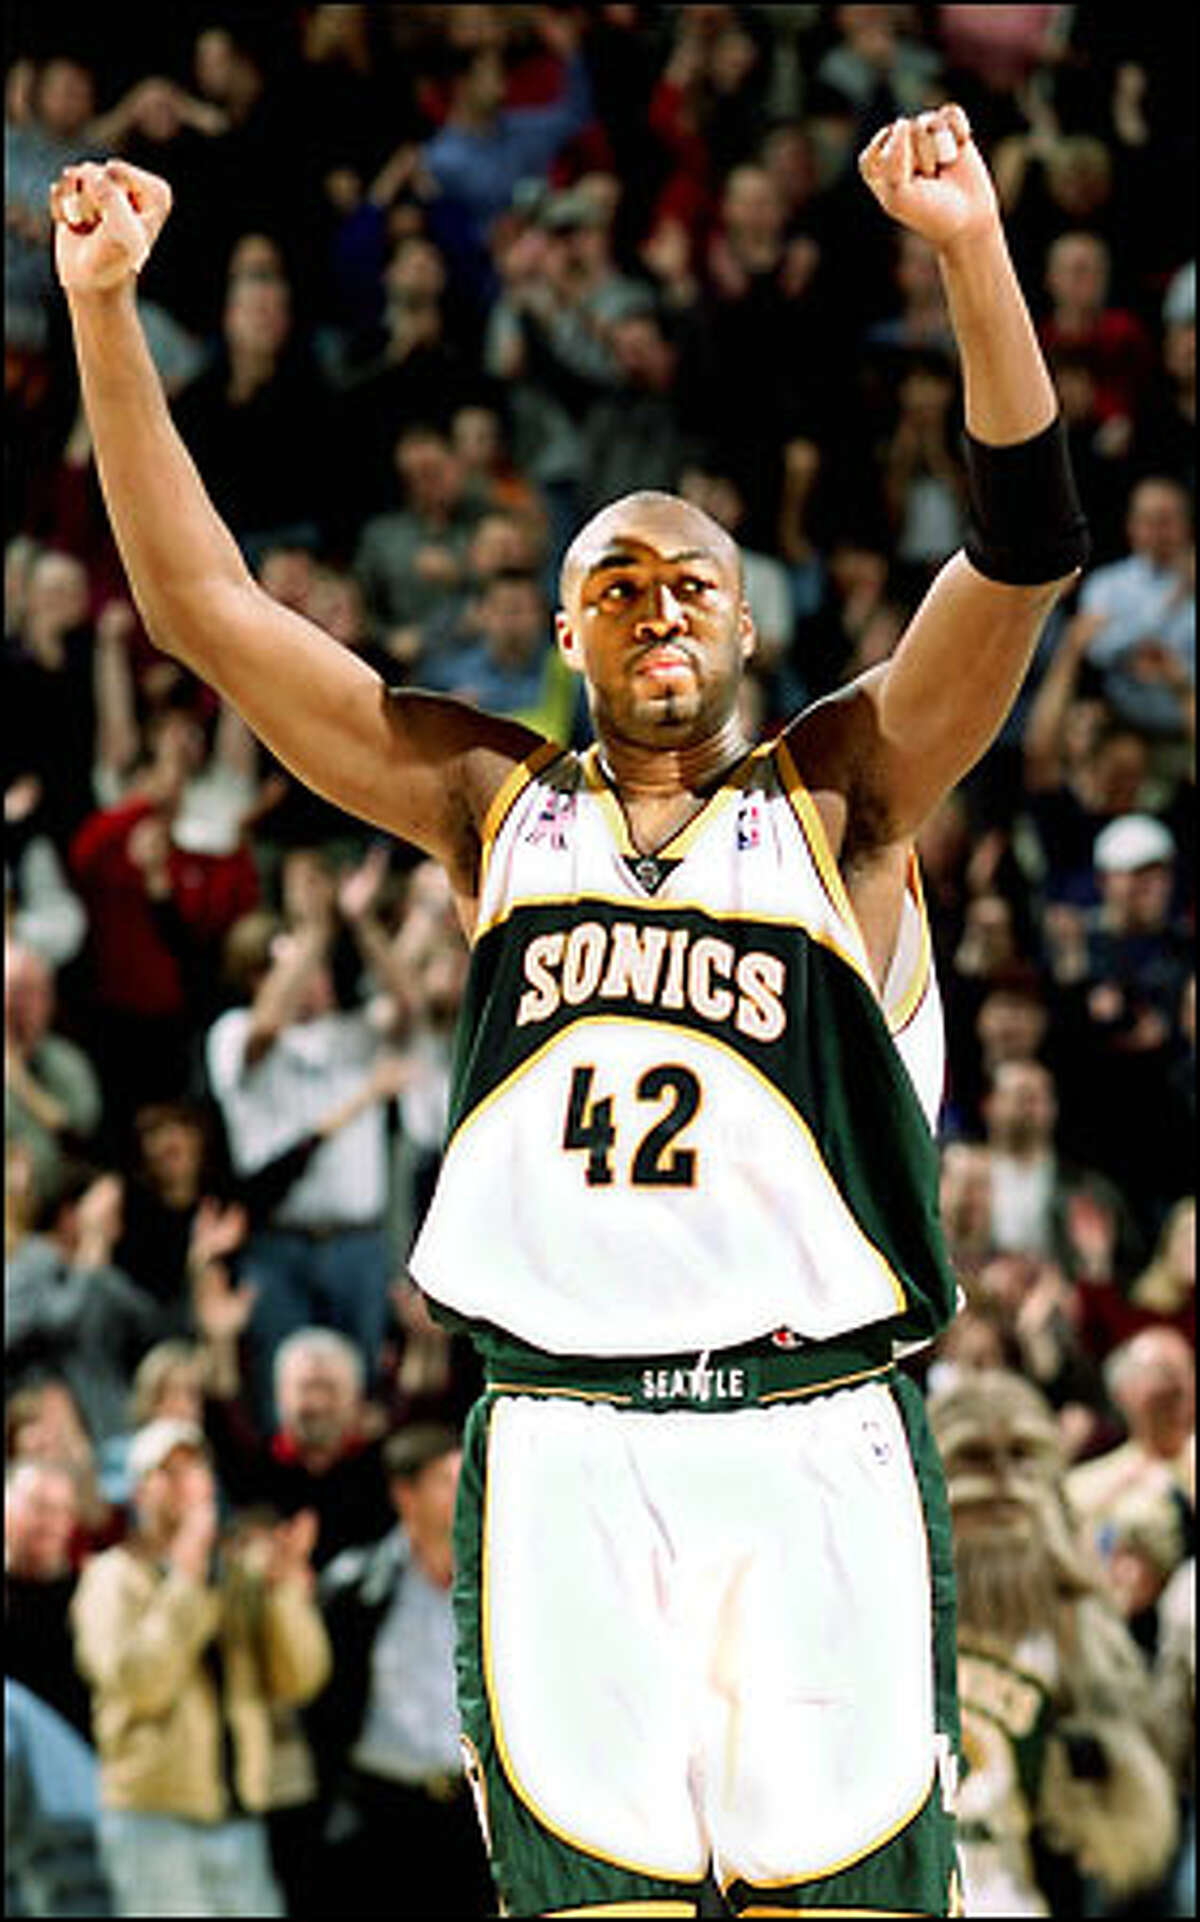 Power forward Vin Baker has been a pleasant surprise, dropping excess pounds and rediscovering his game, averaging 16.7 points and 6.8 rebounds.